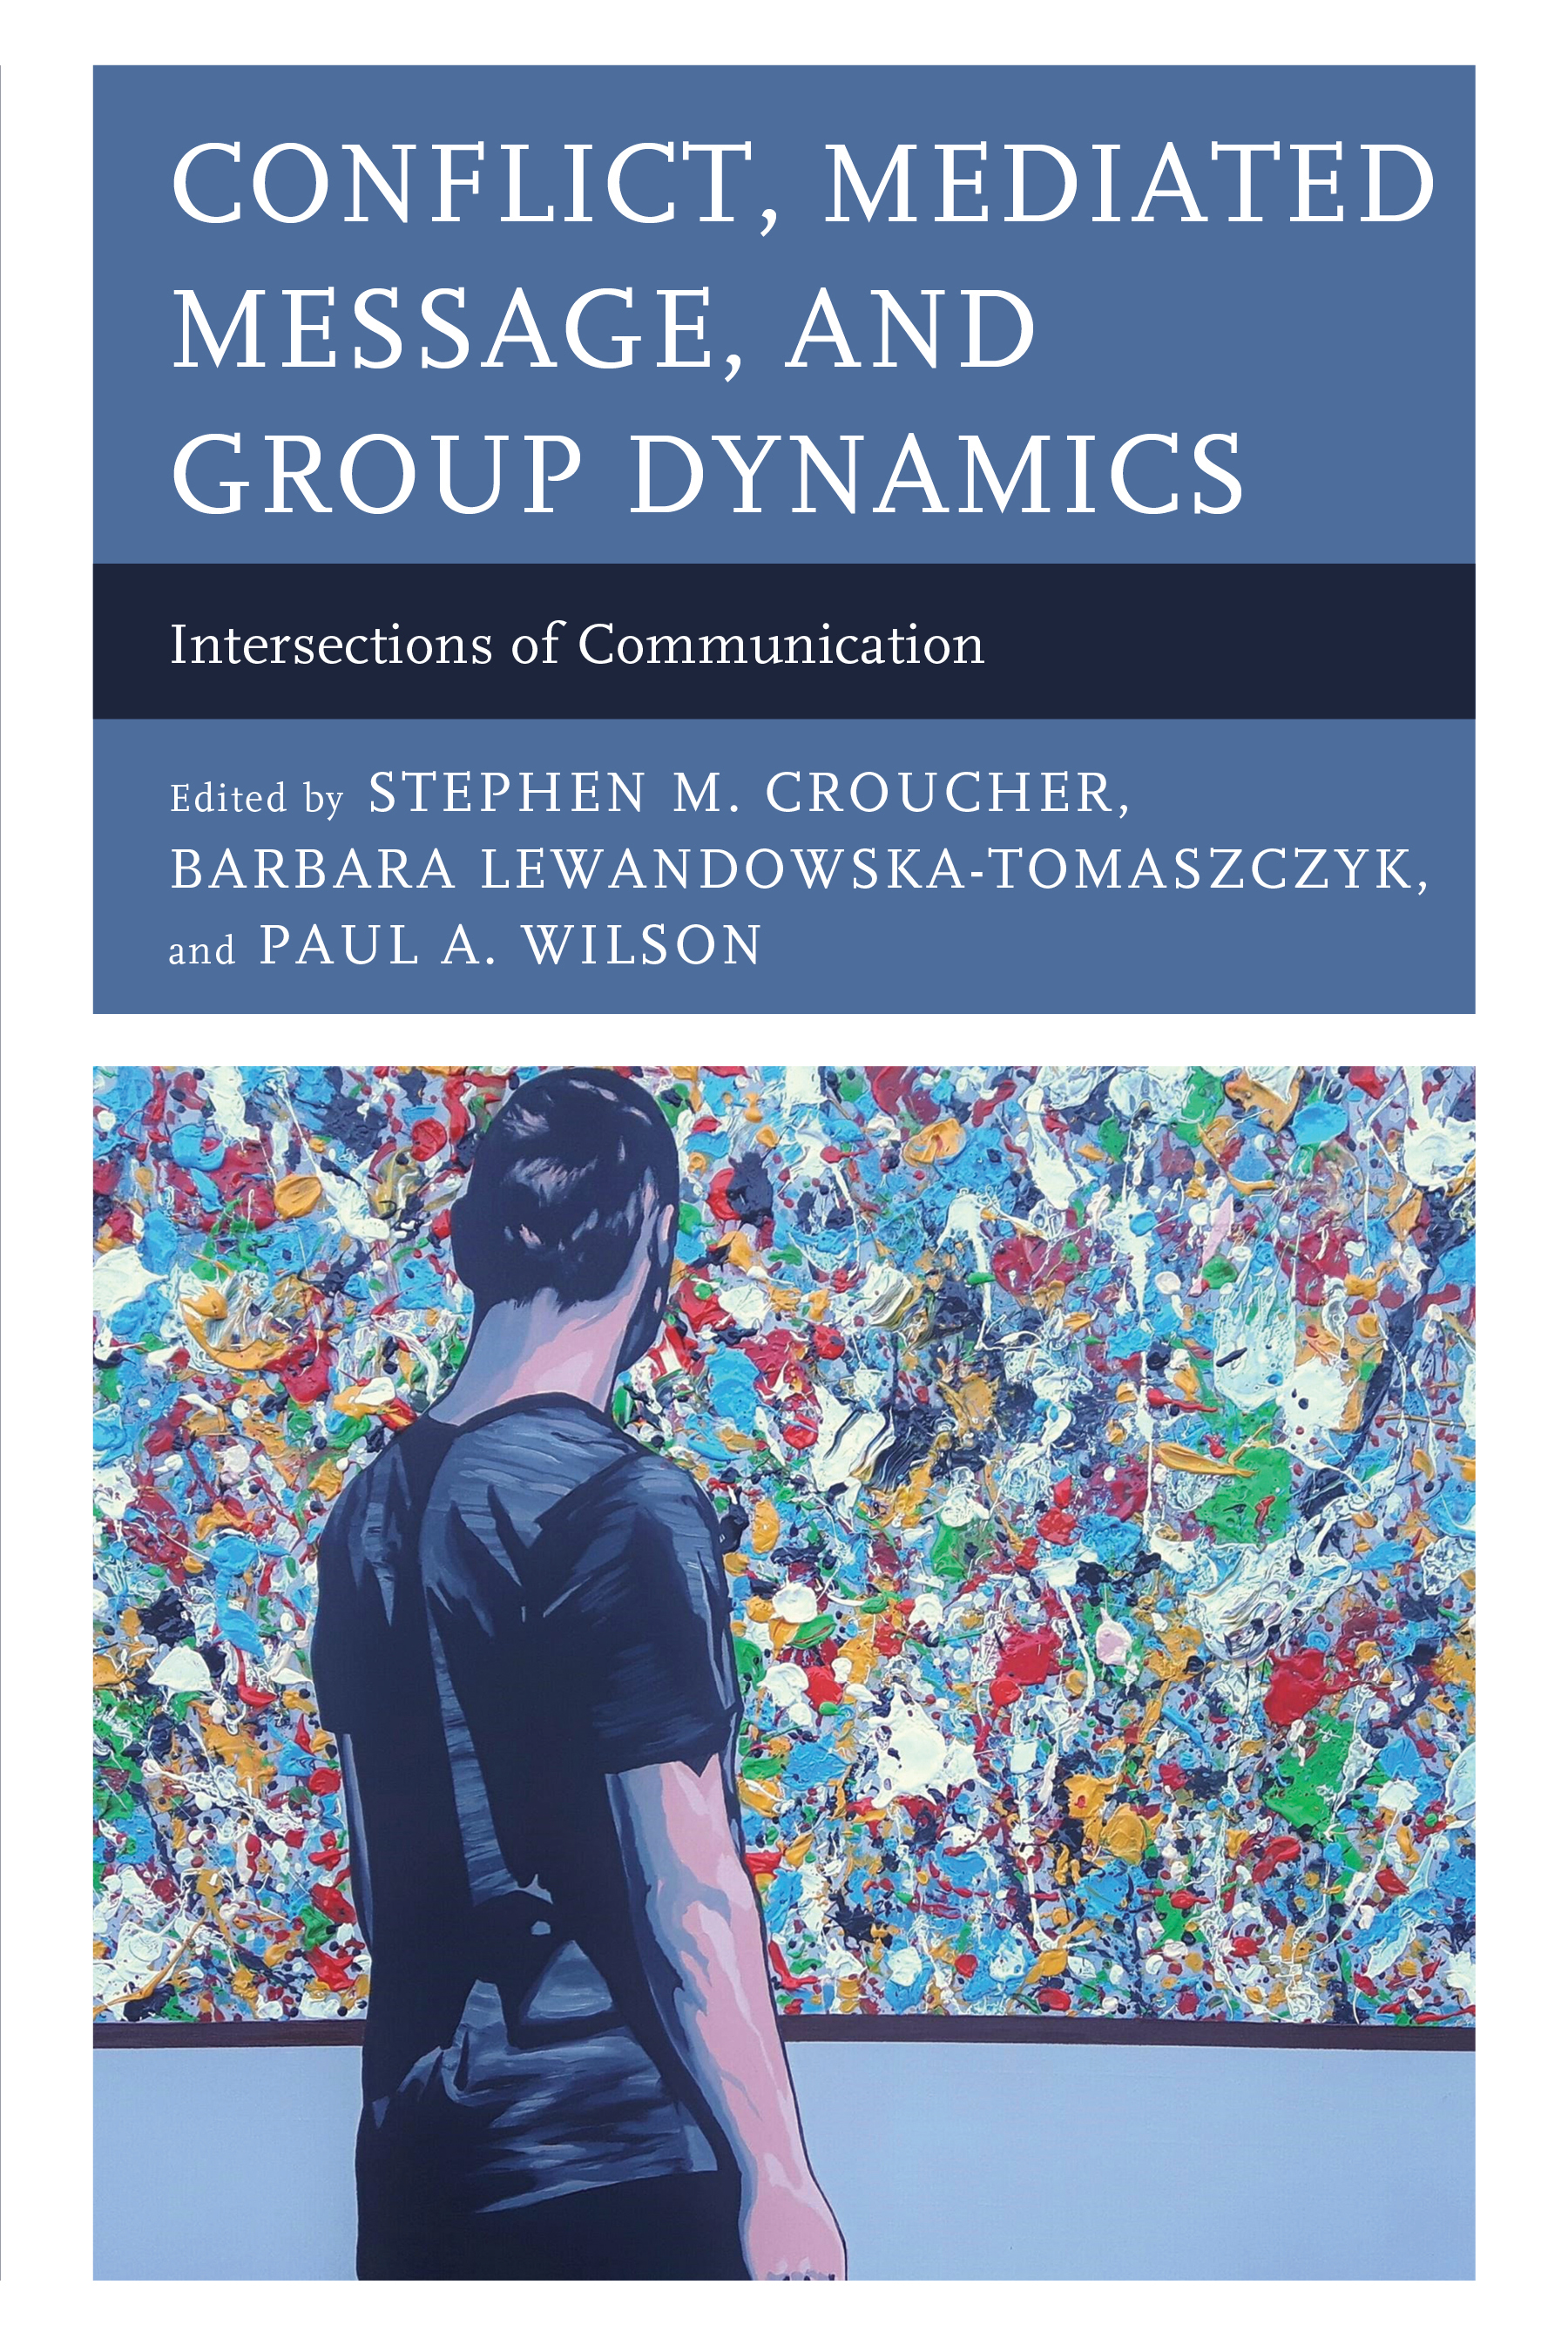 Conflict, Mediated Message, and Group Dynamics: Intersections of Communication